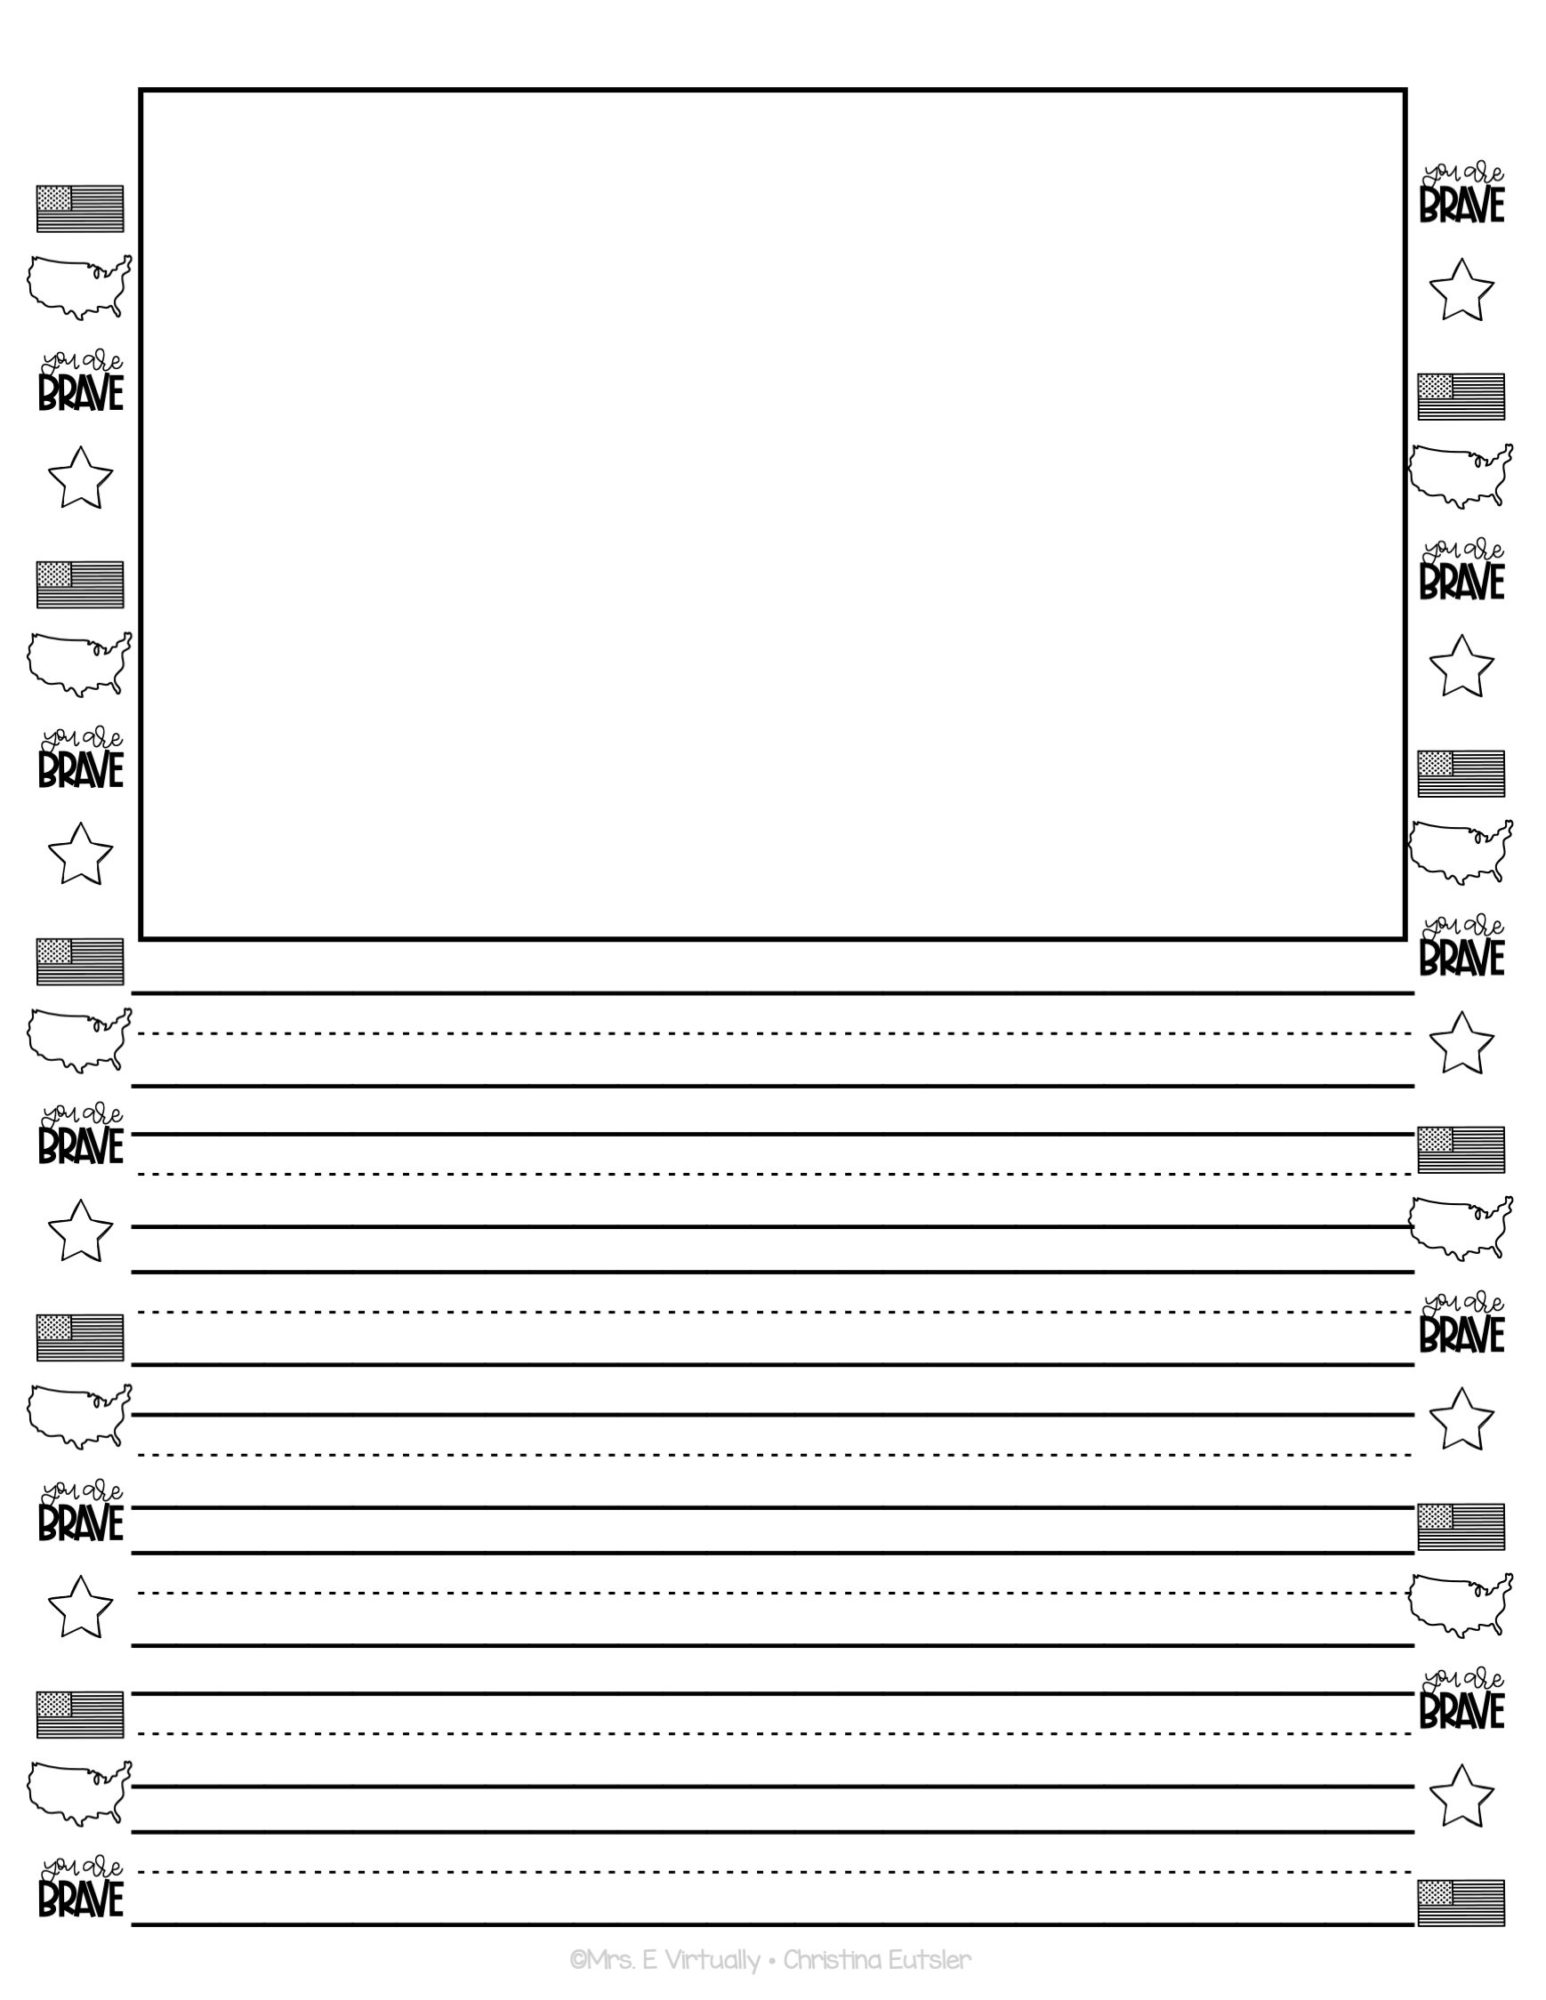 Kindergarten Writing Paper with Picture Box • Mrs E Virtually